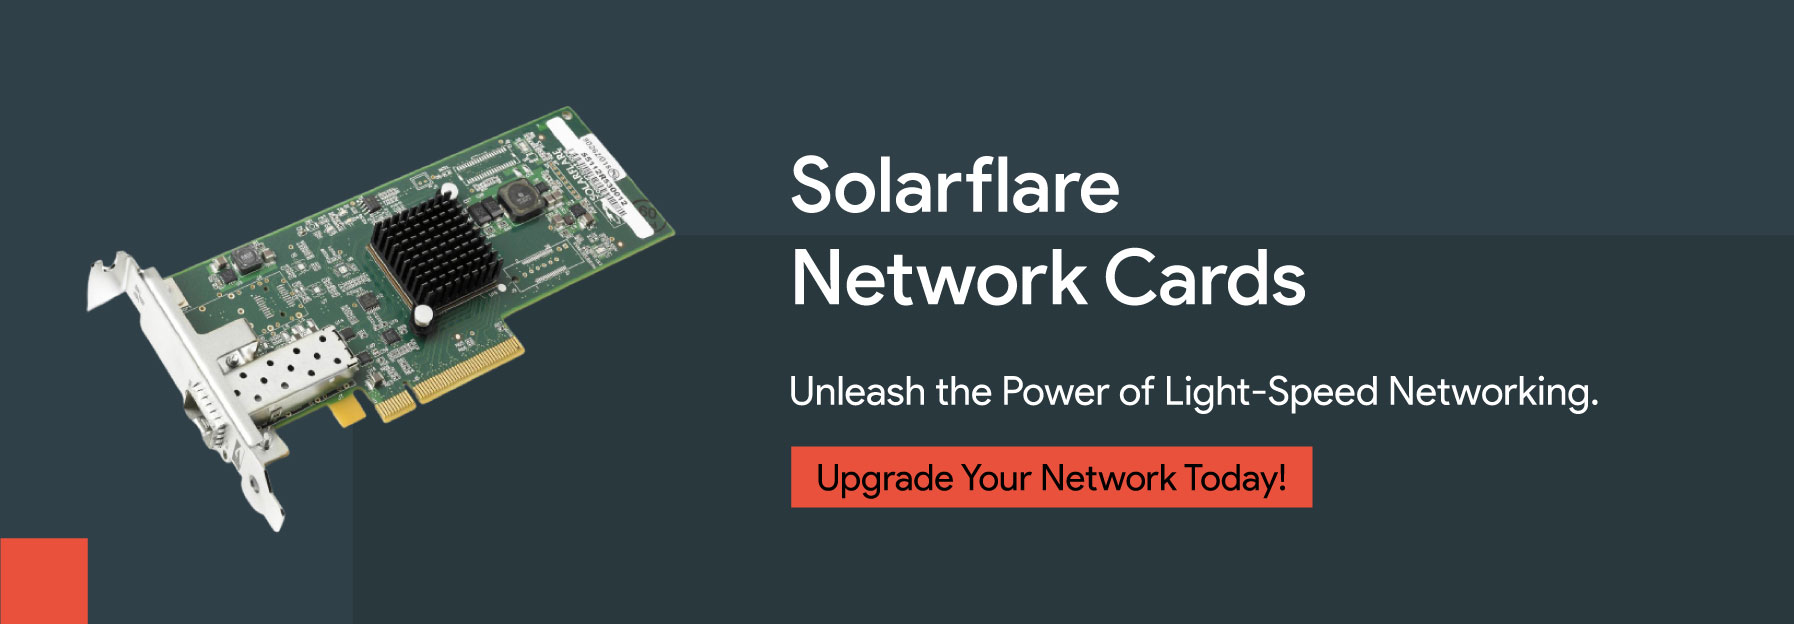 solarflare network cards